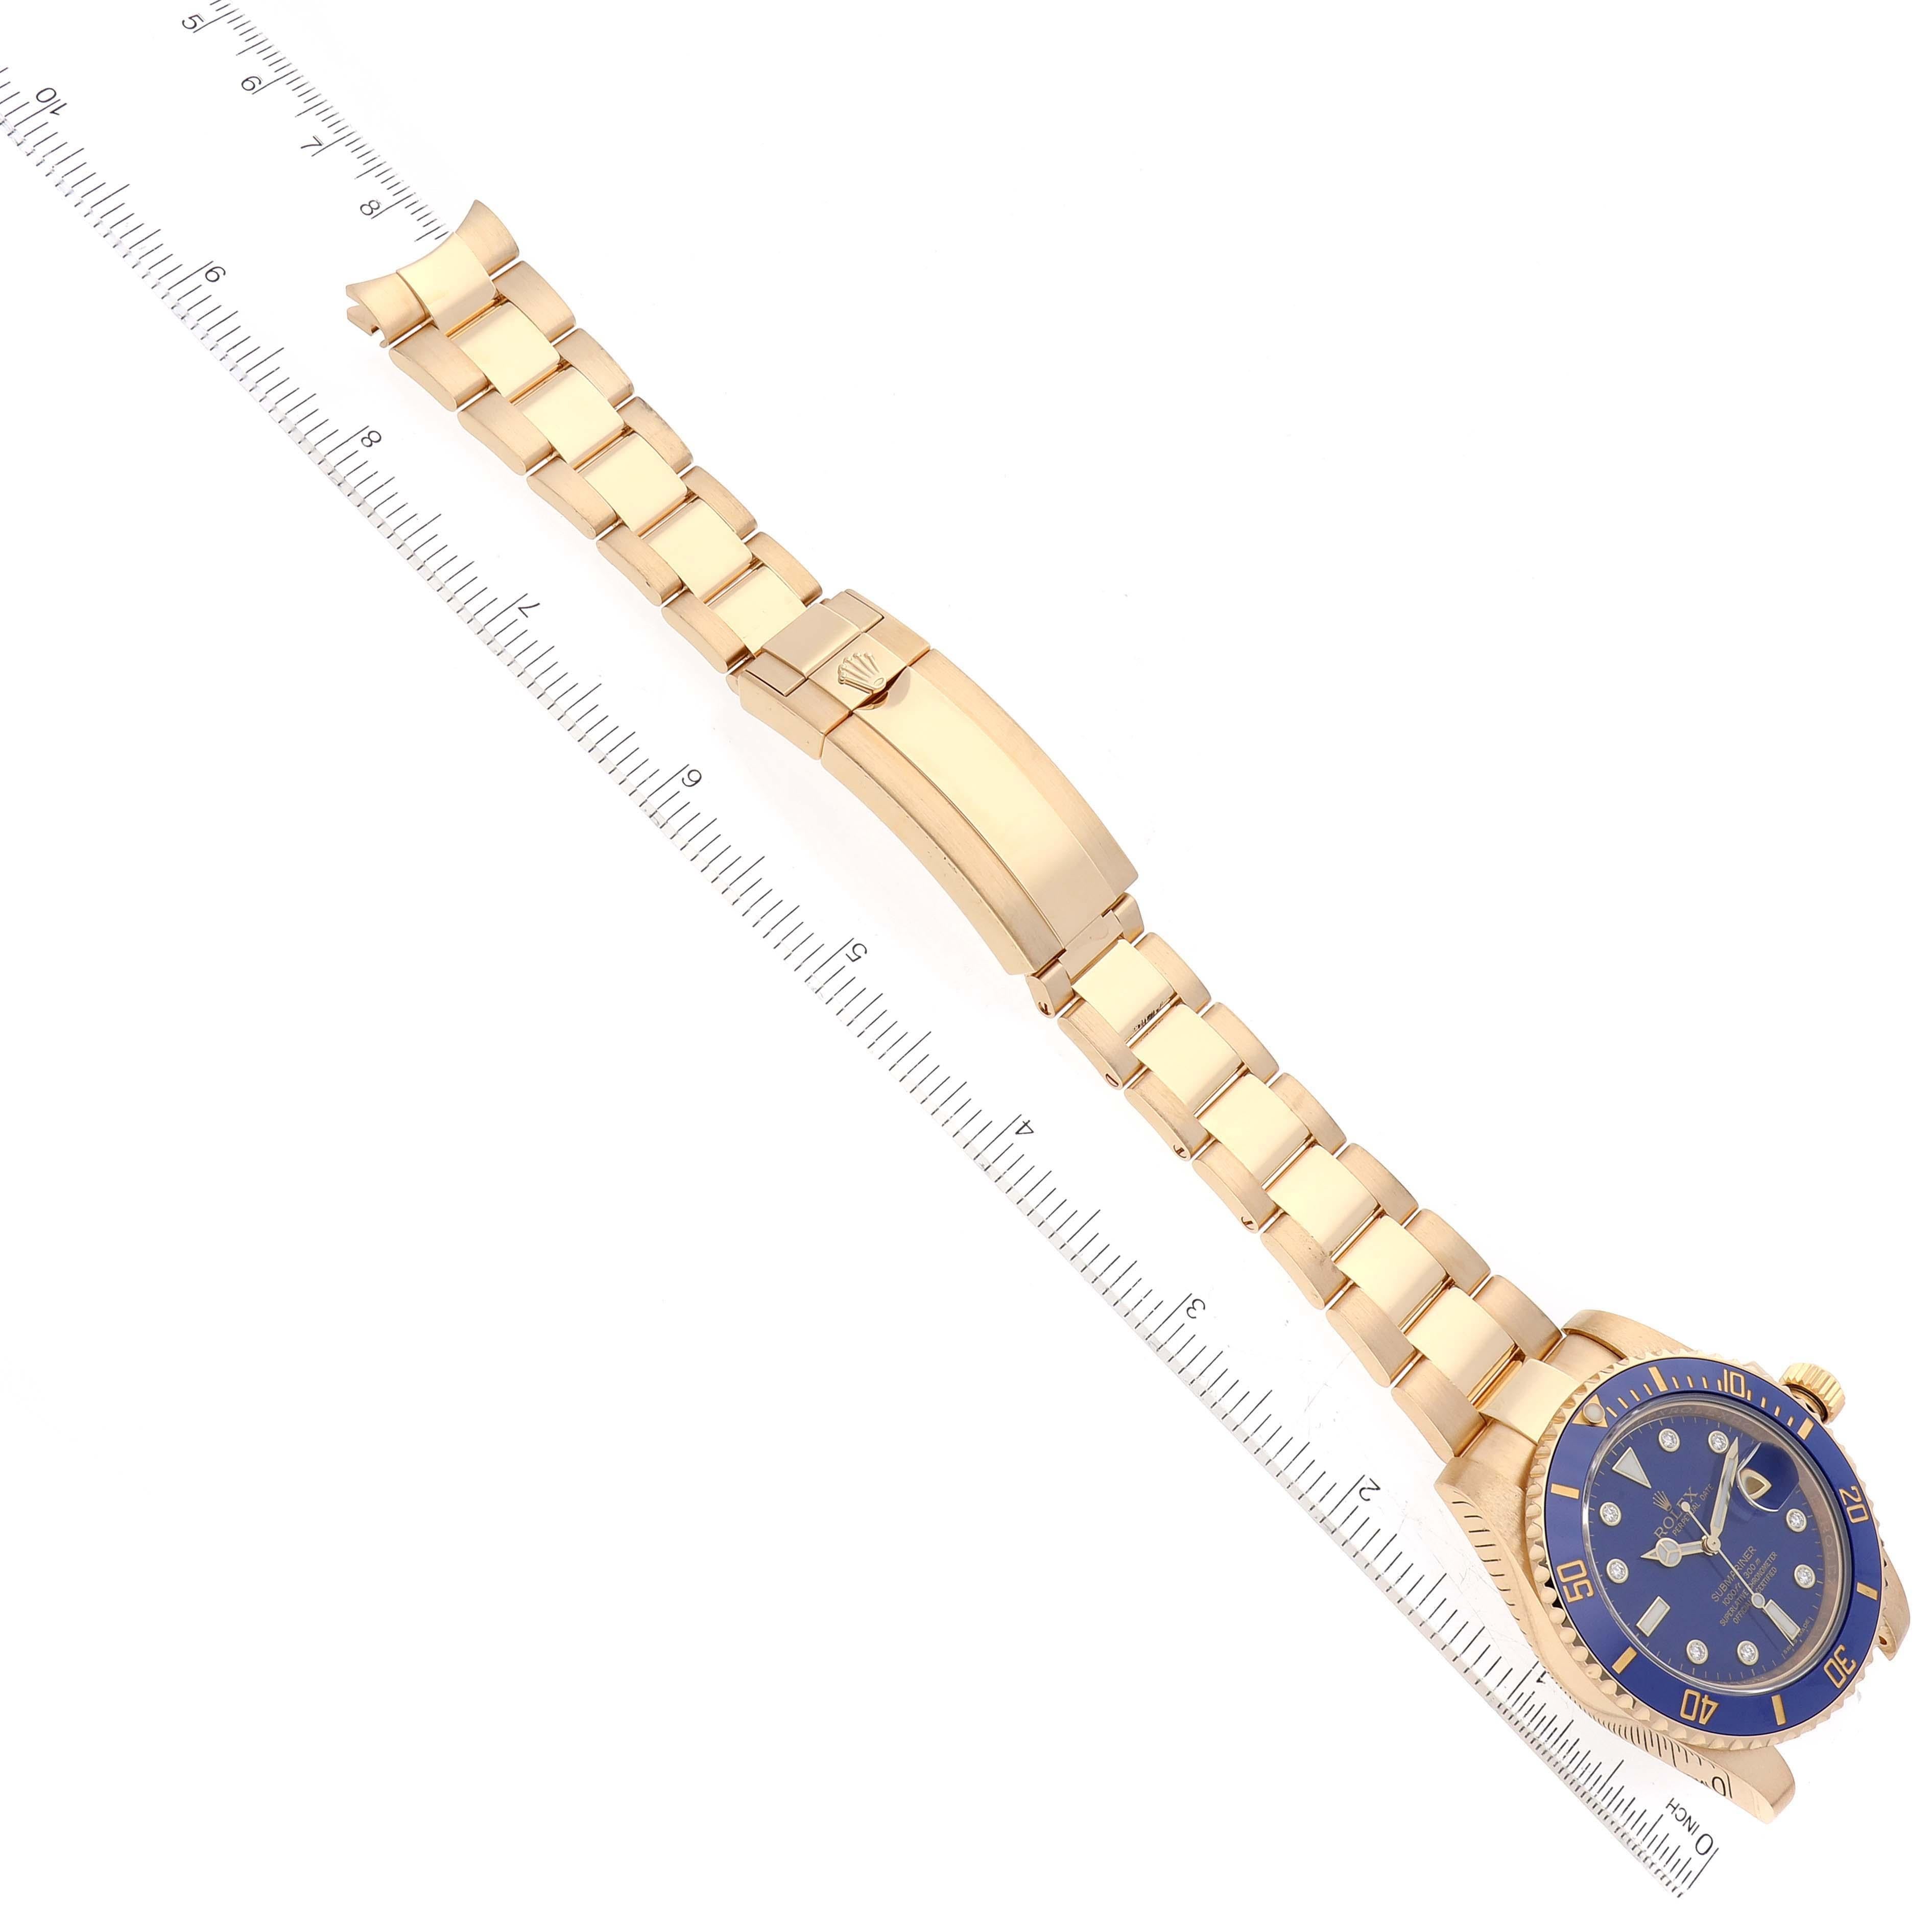 Rolex Submariner Yellow Gold Blue Diamond Dial Mens Watch 116618 Box Card For Sale 8